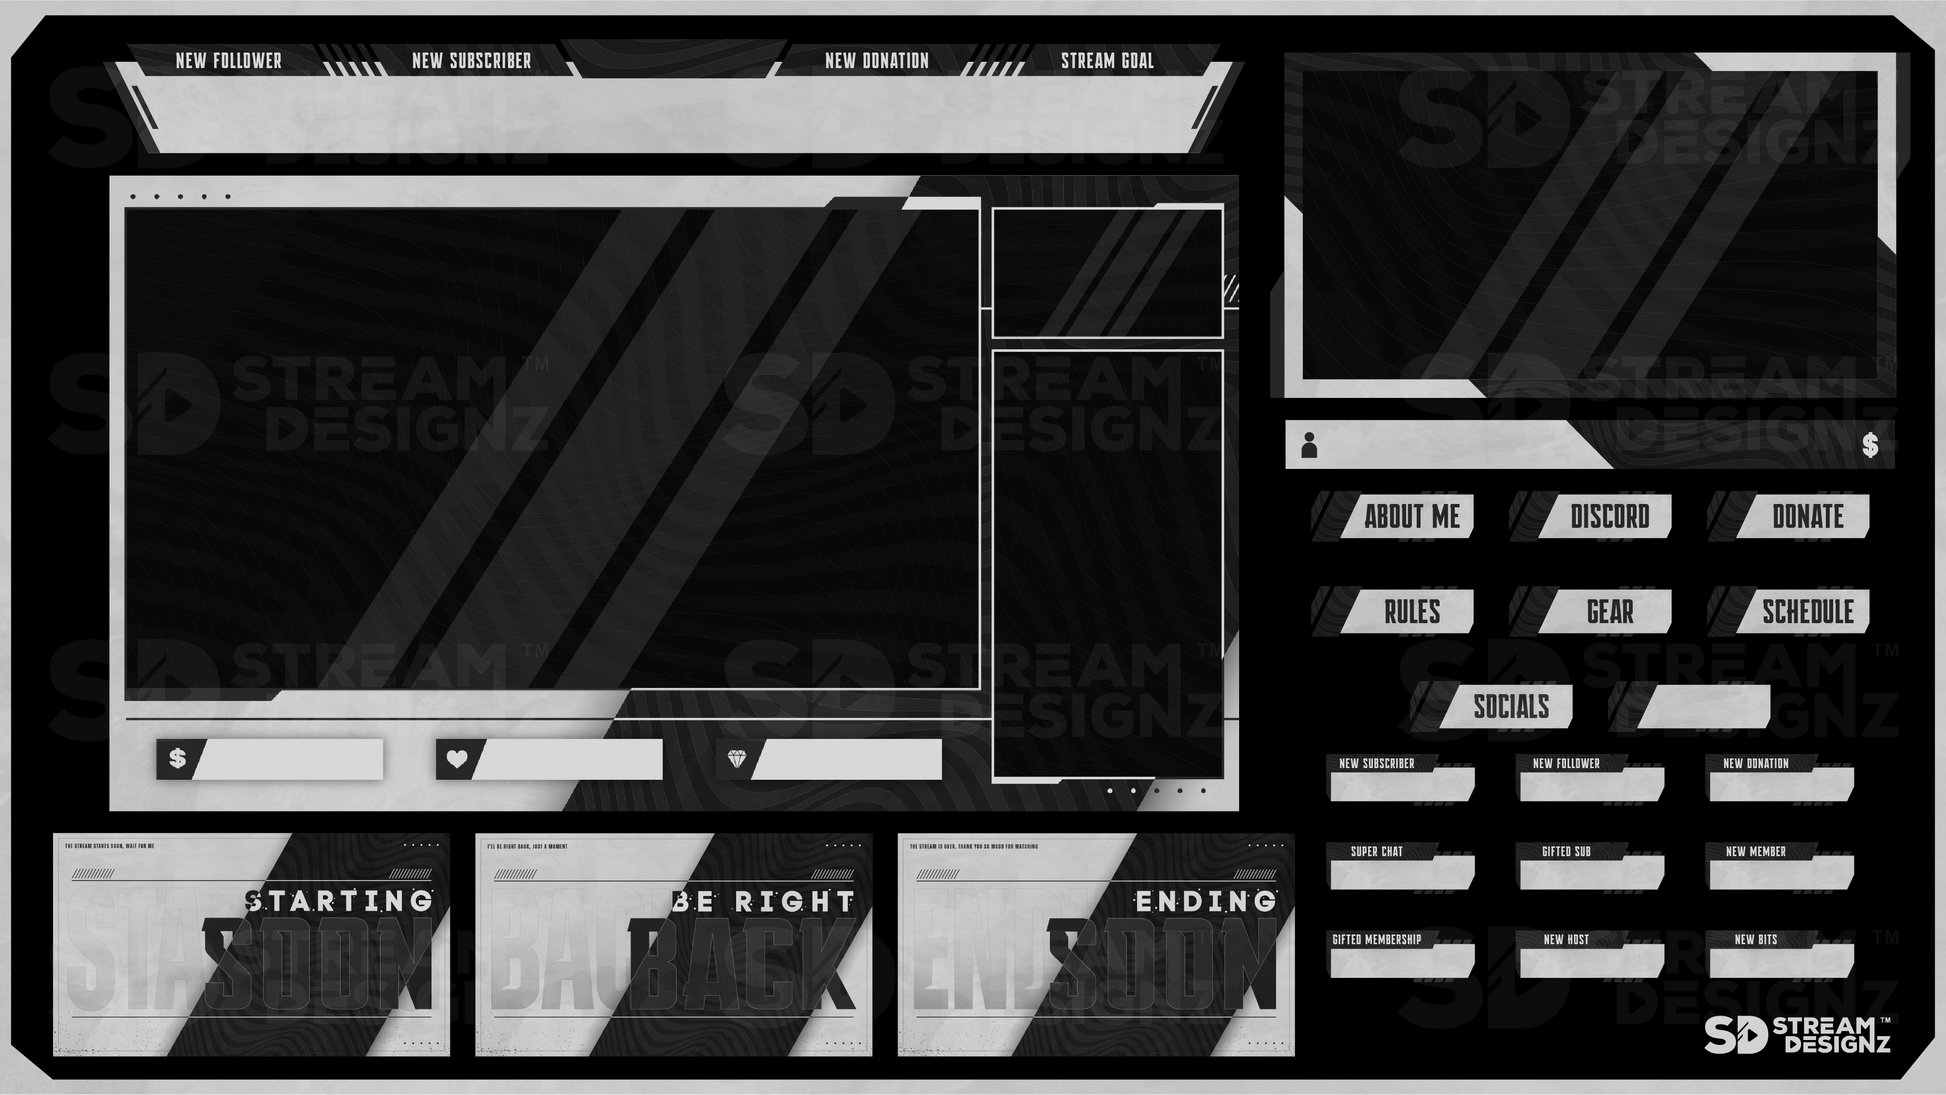 animated stream overlay package feature image slate stream designz